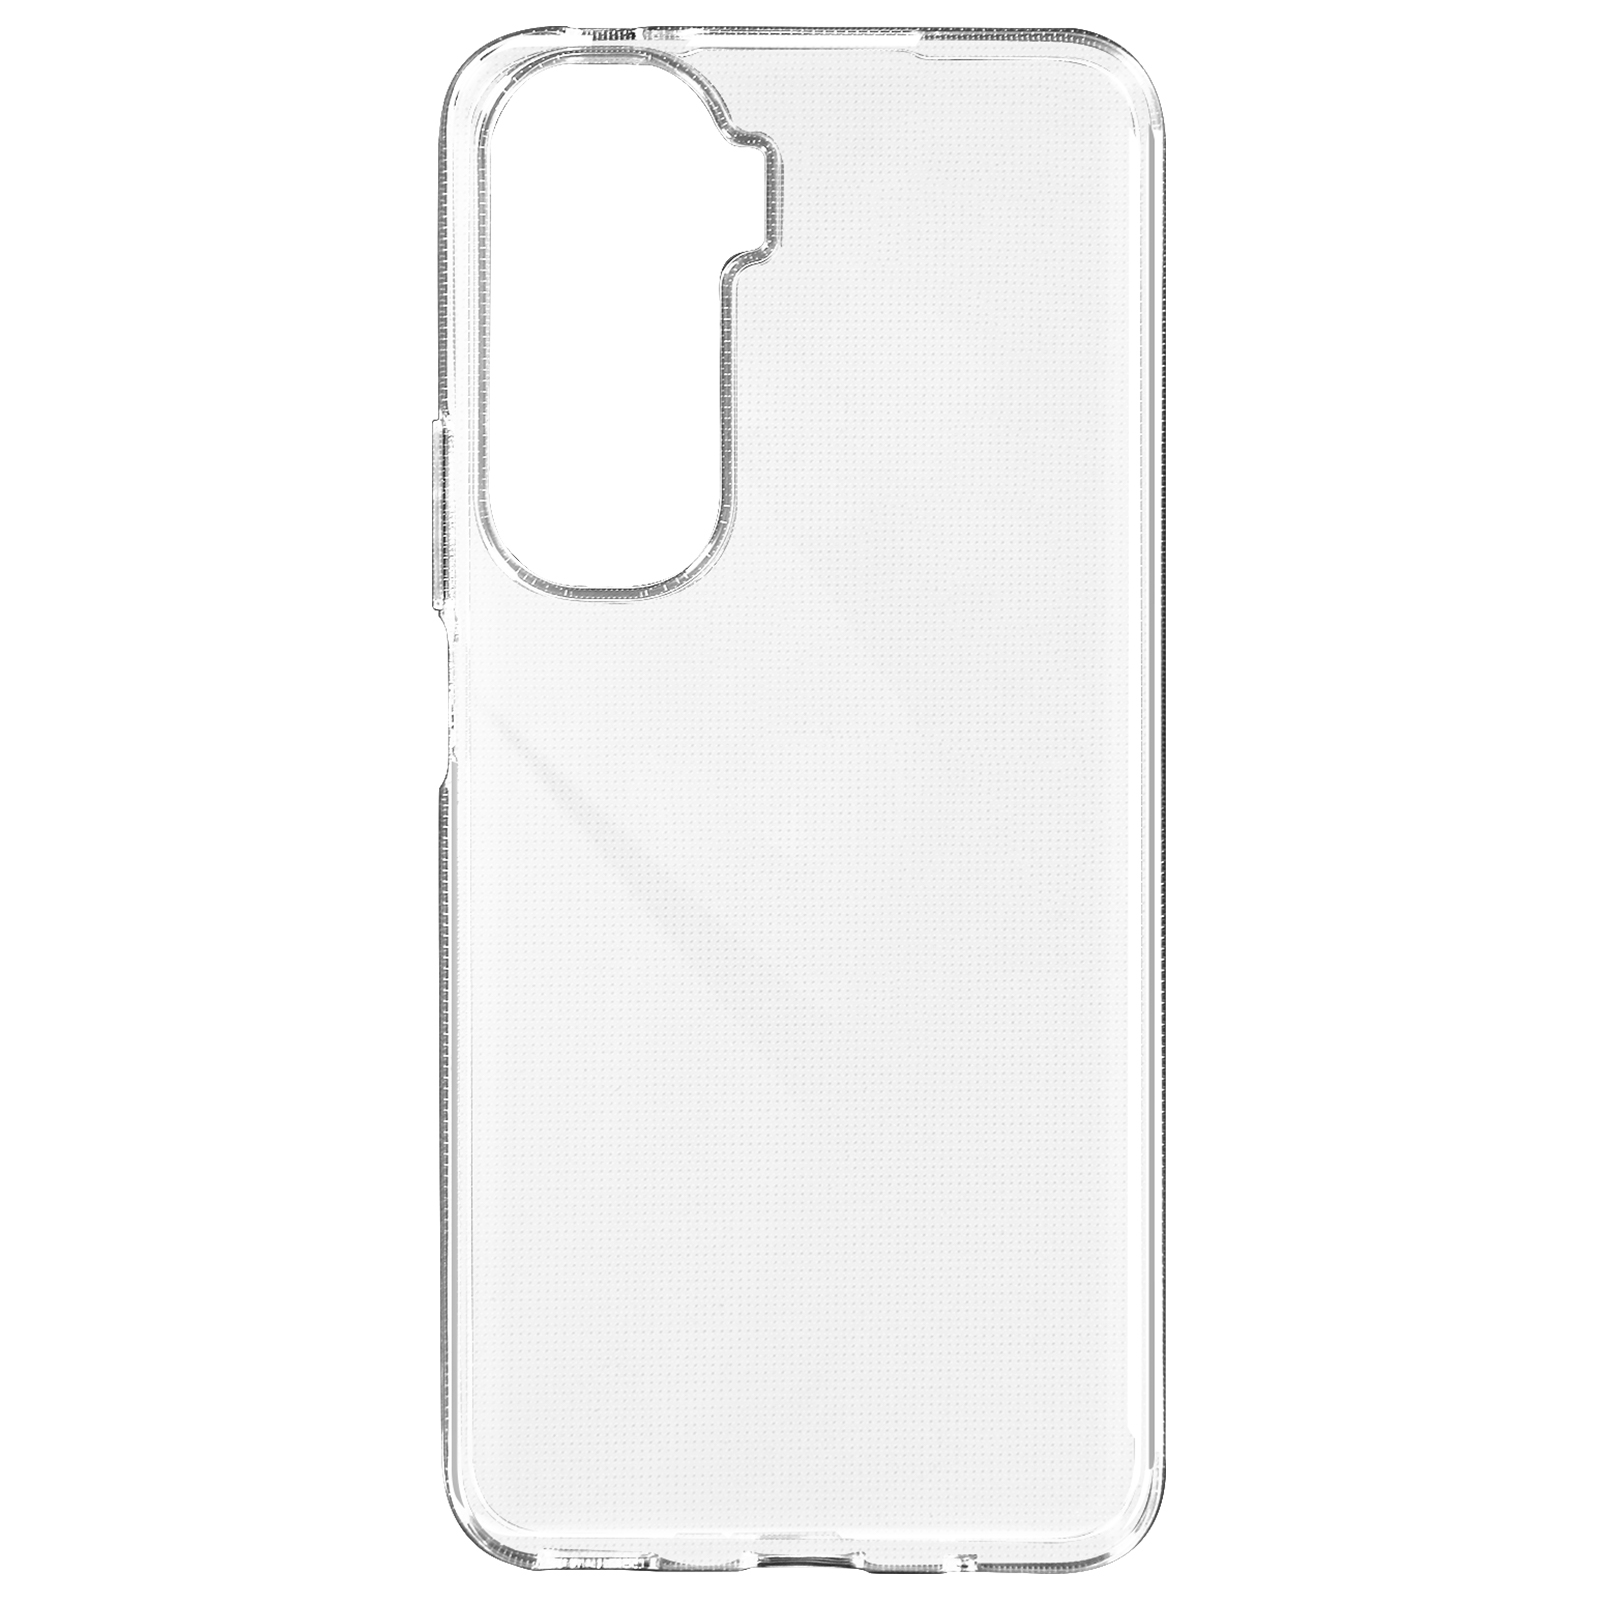 Case Series, Lite, MYWAY Backcover, 90 Transparent Soft Honor,